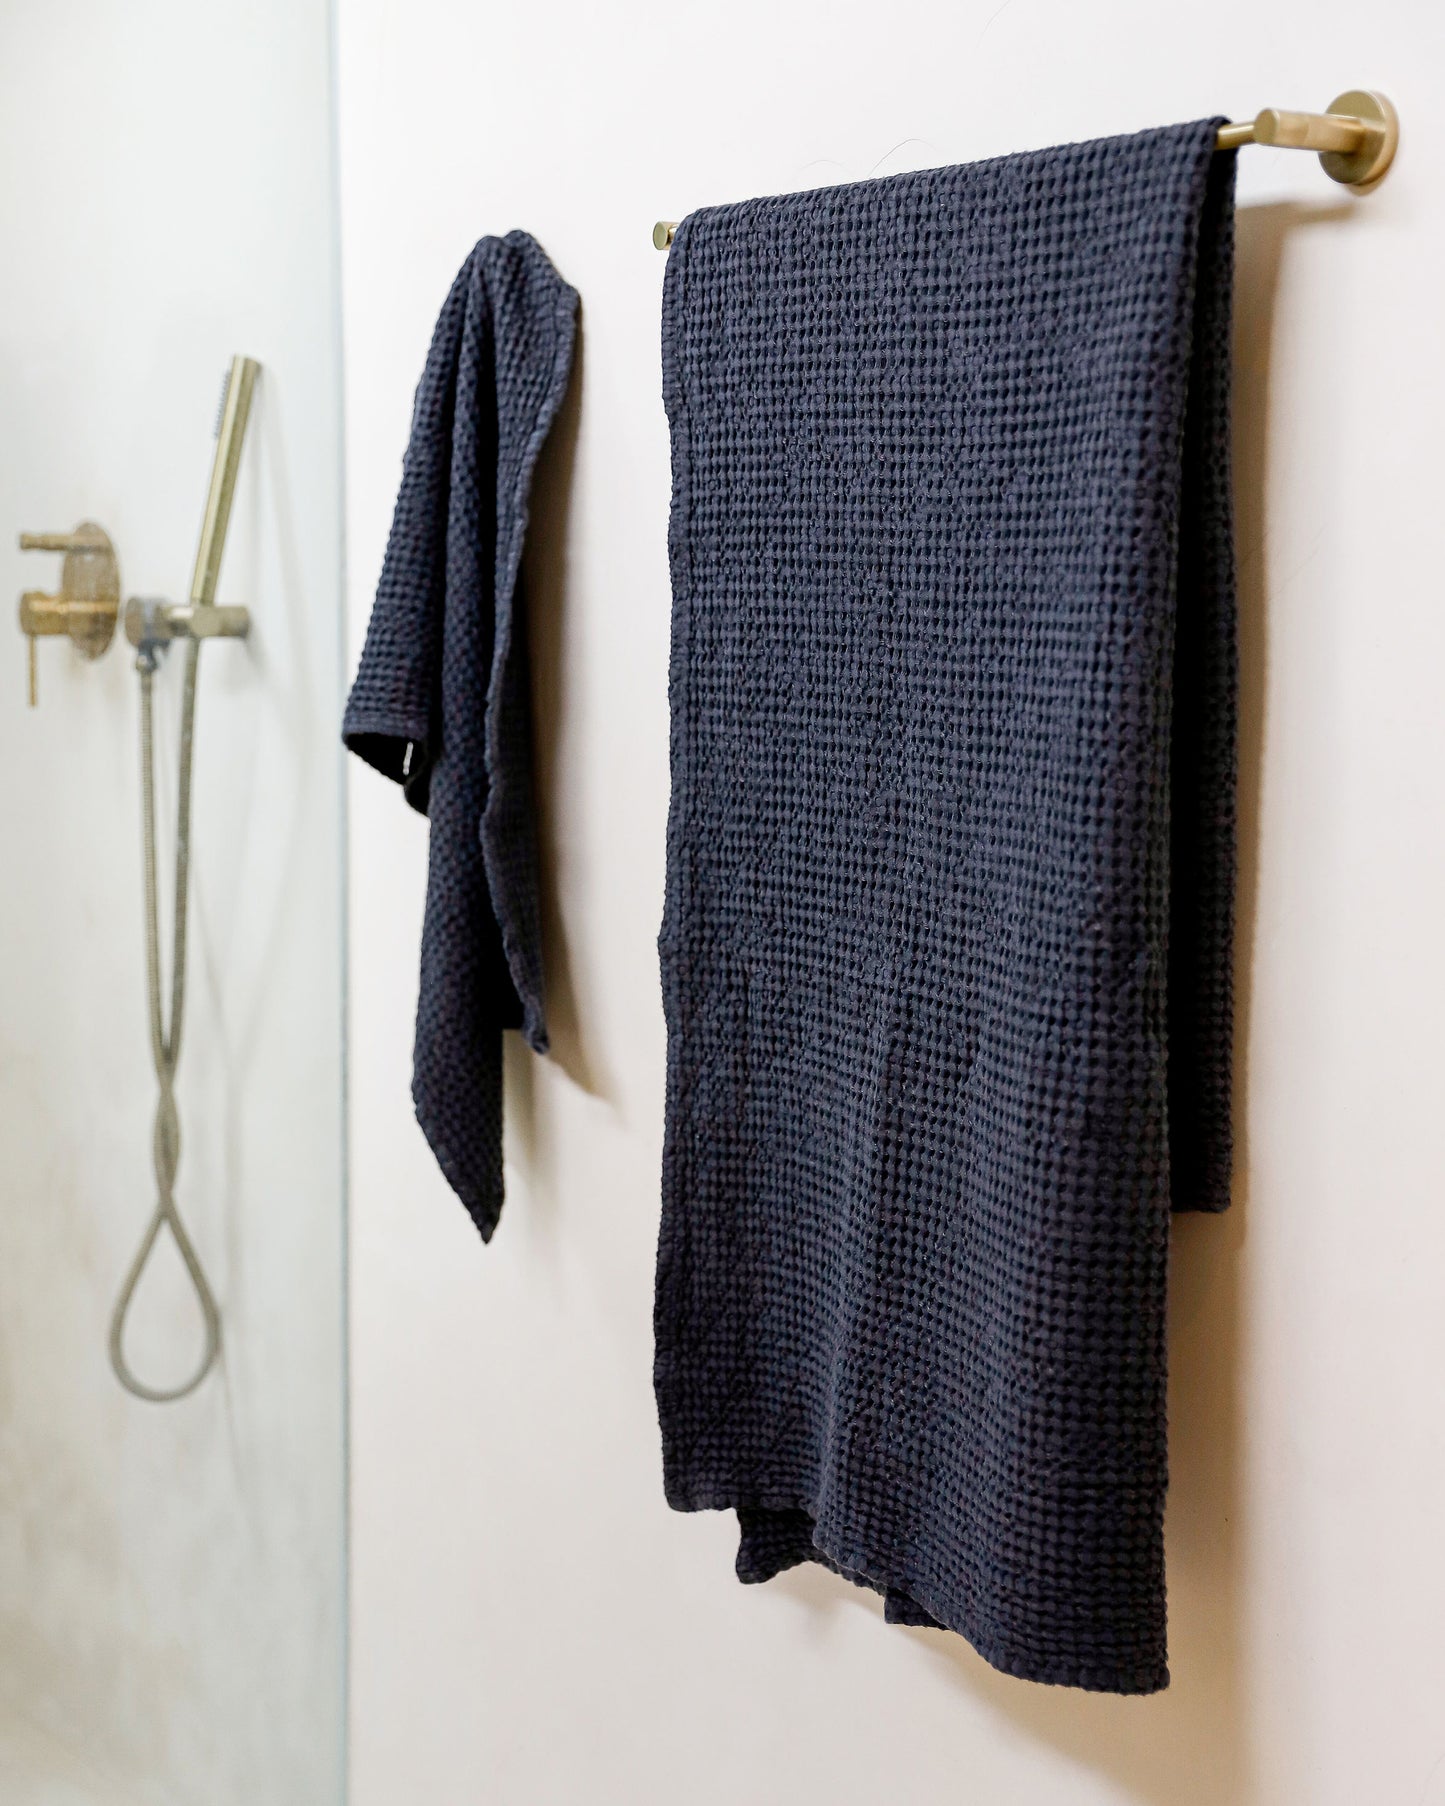 MagicLinen 3-Piece Waffle Towel Set in Dark Gray at Urban Outfitters